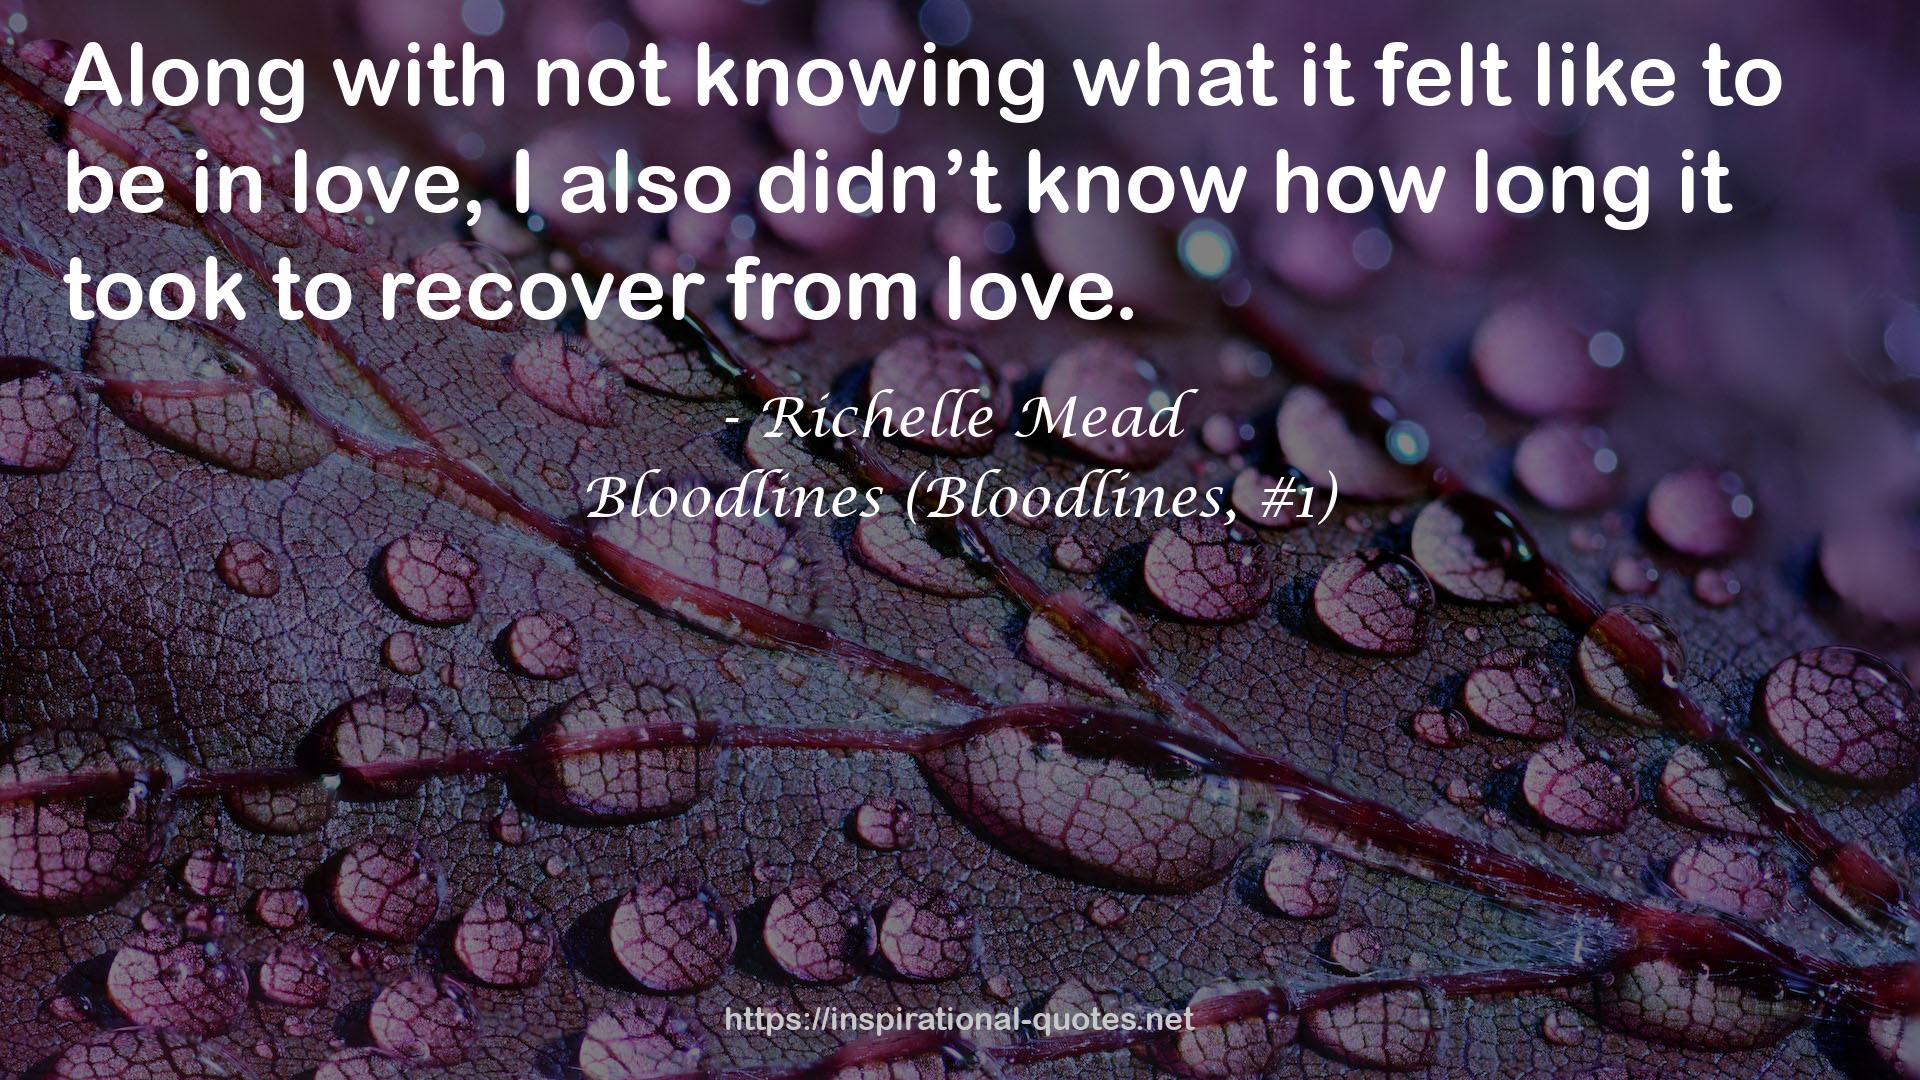 Bloodlines (Bloodlines, #1) QUOTES